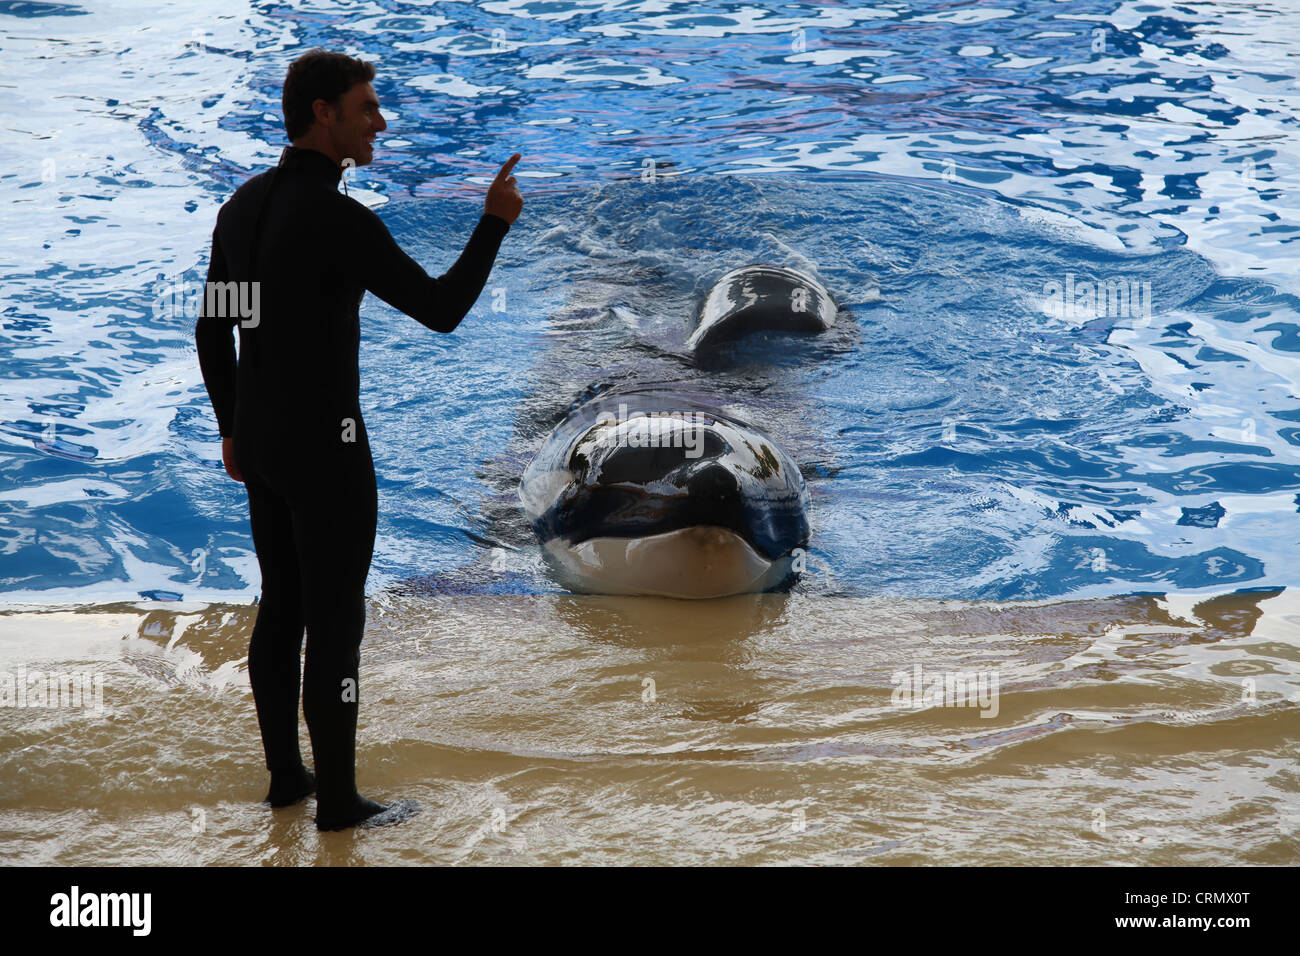 Trainer with an Orca (Killer Whale) at Loro Parque Stock Photo